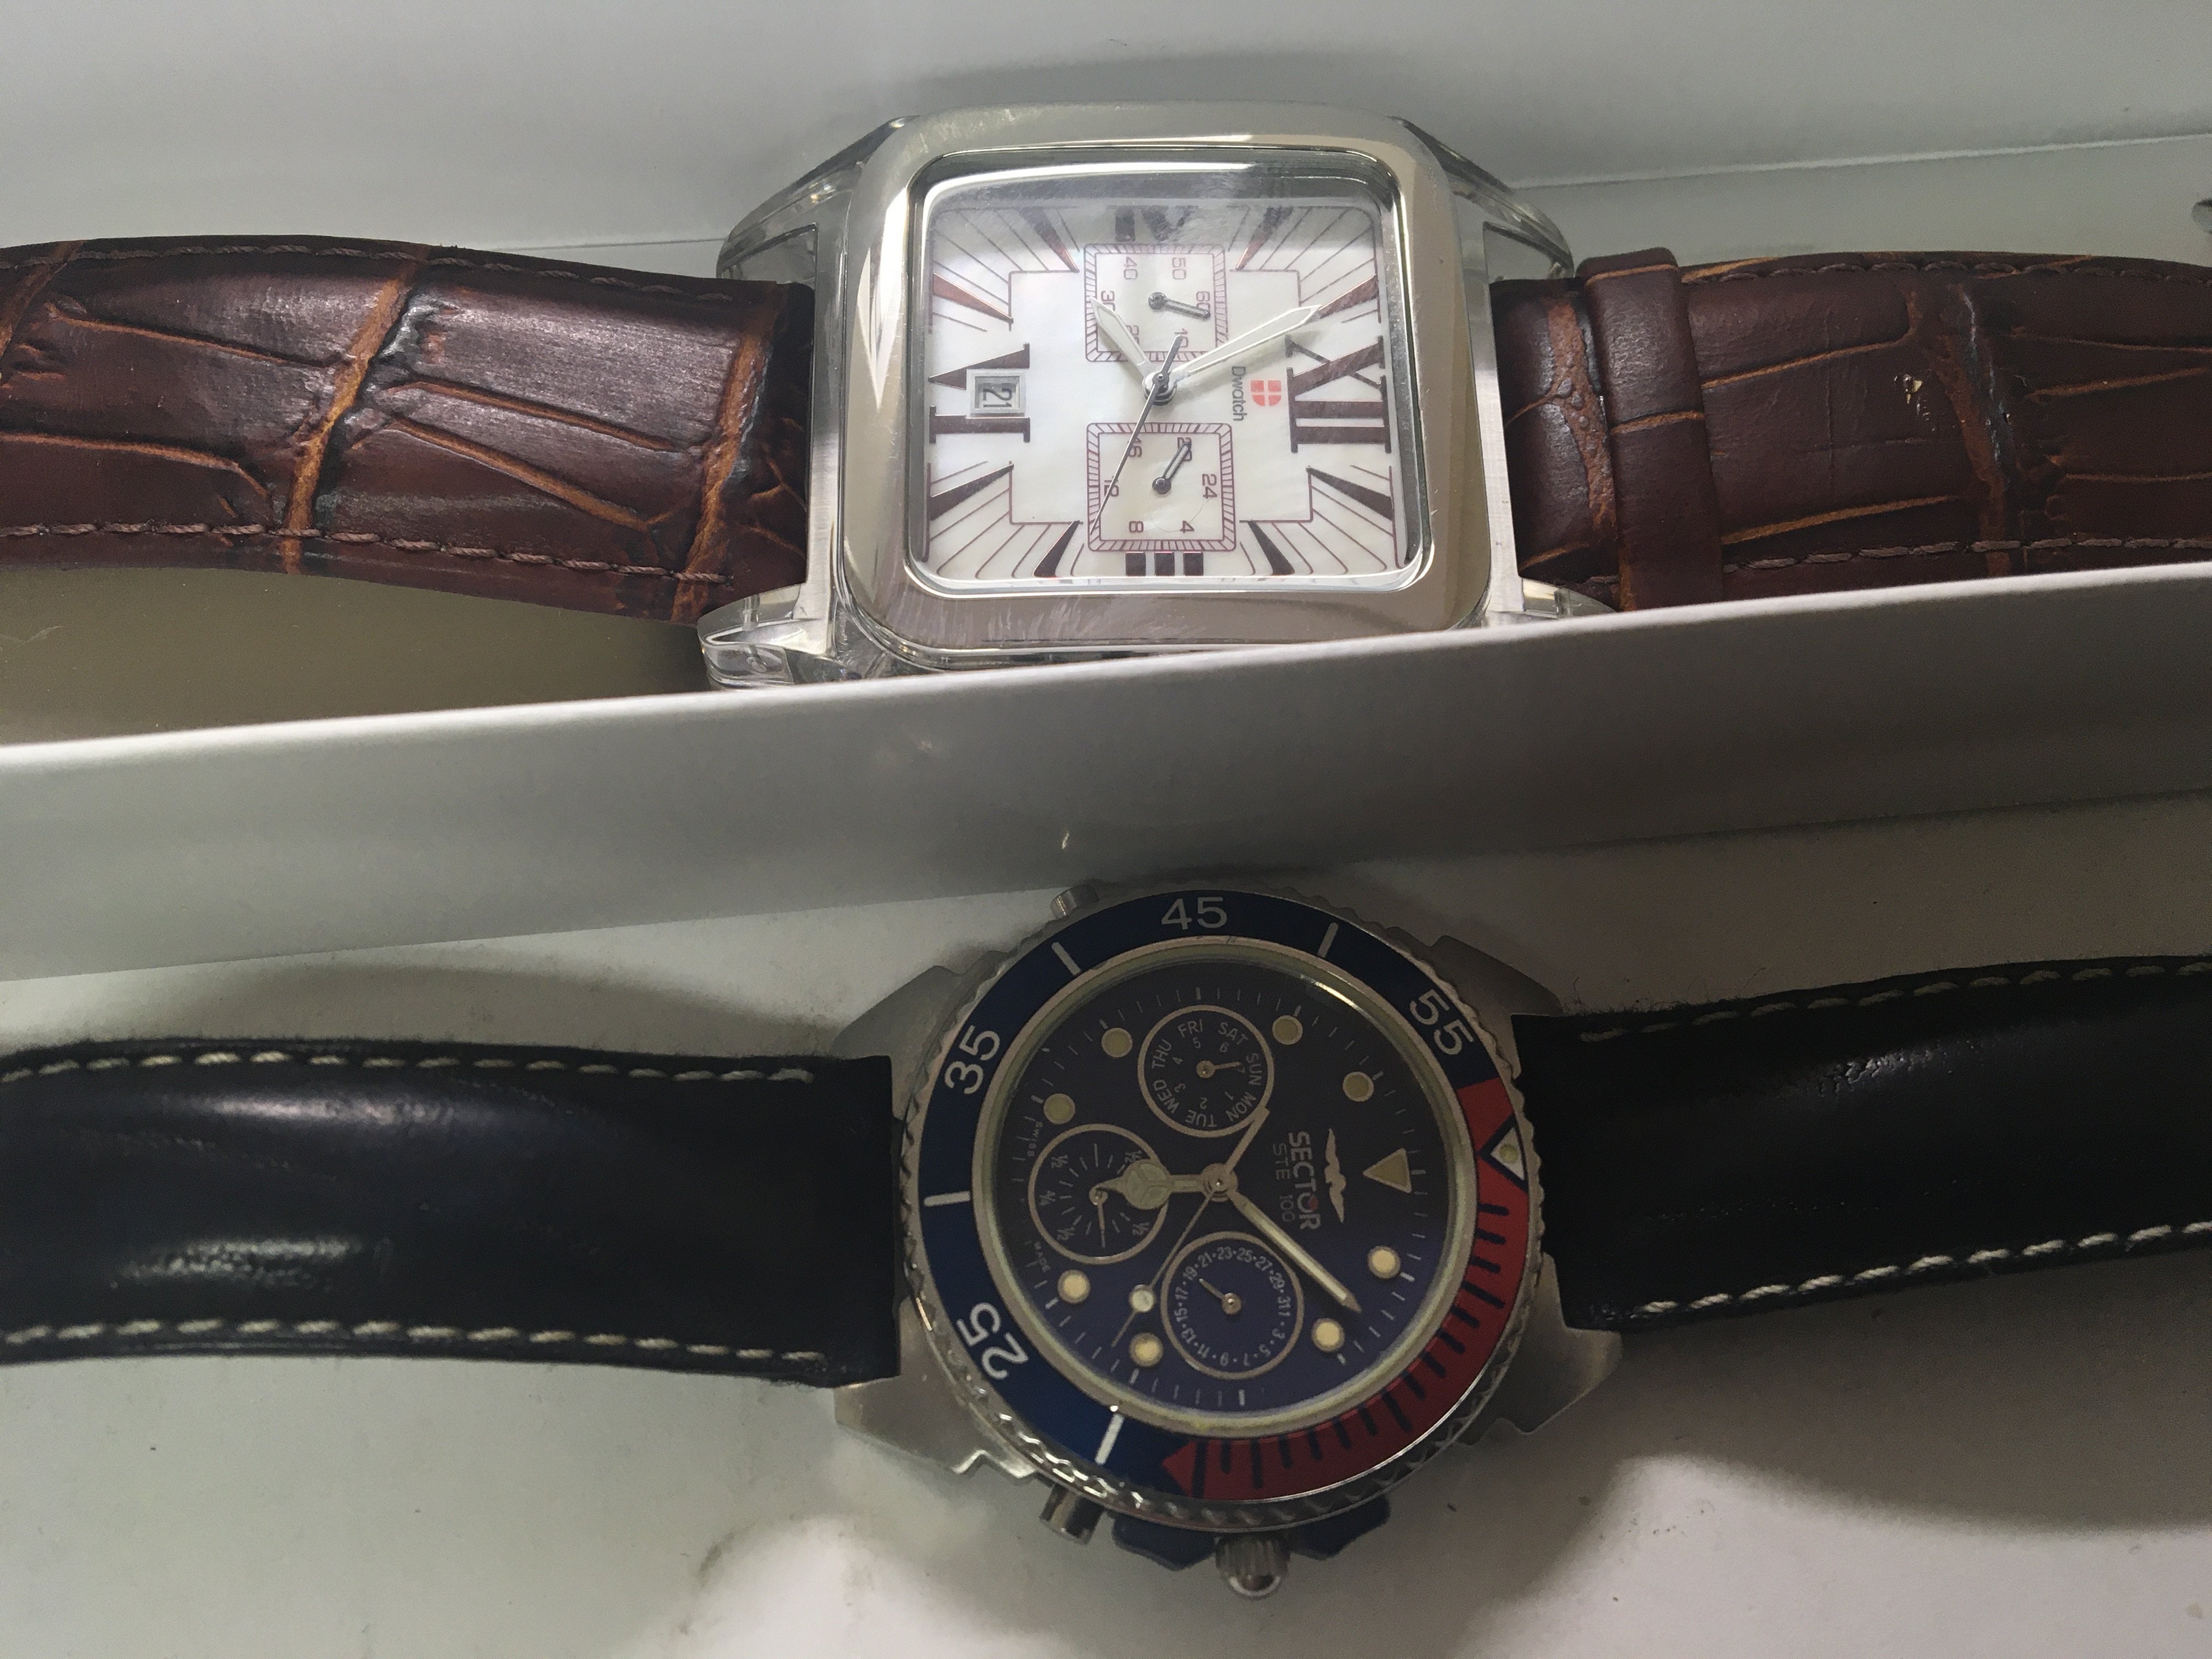 A Swiss Gents Dwatch Chronograph and a gents Secto